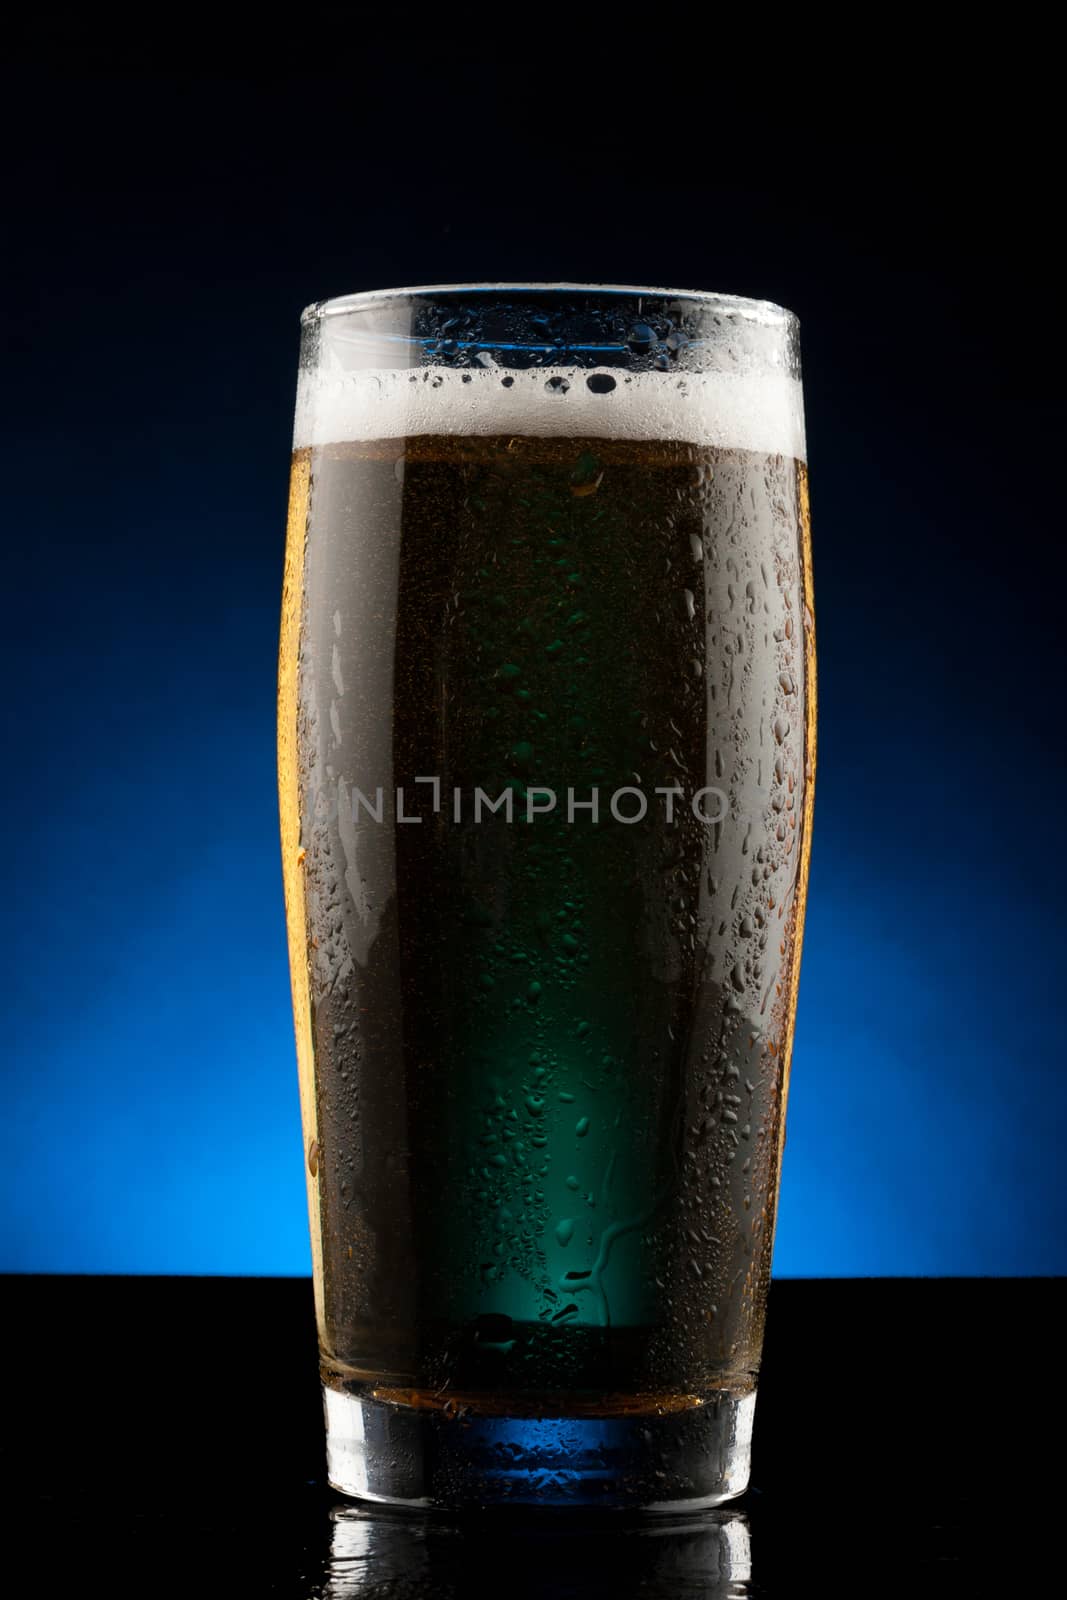 back lit glass of beer with water drops